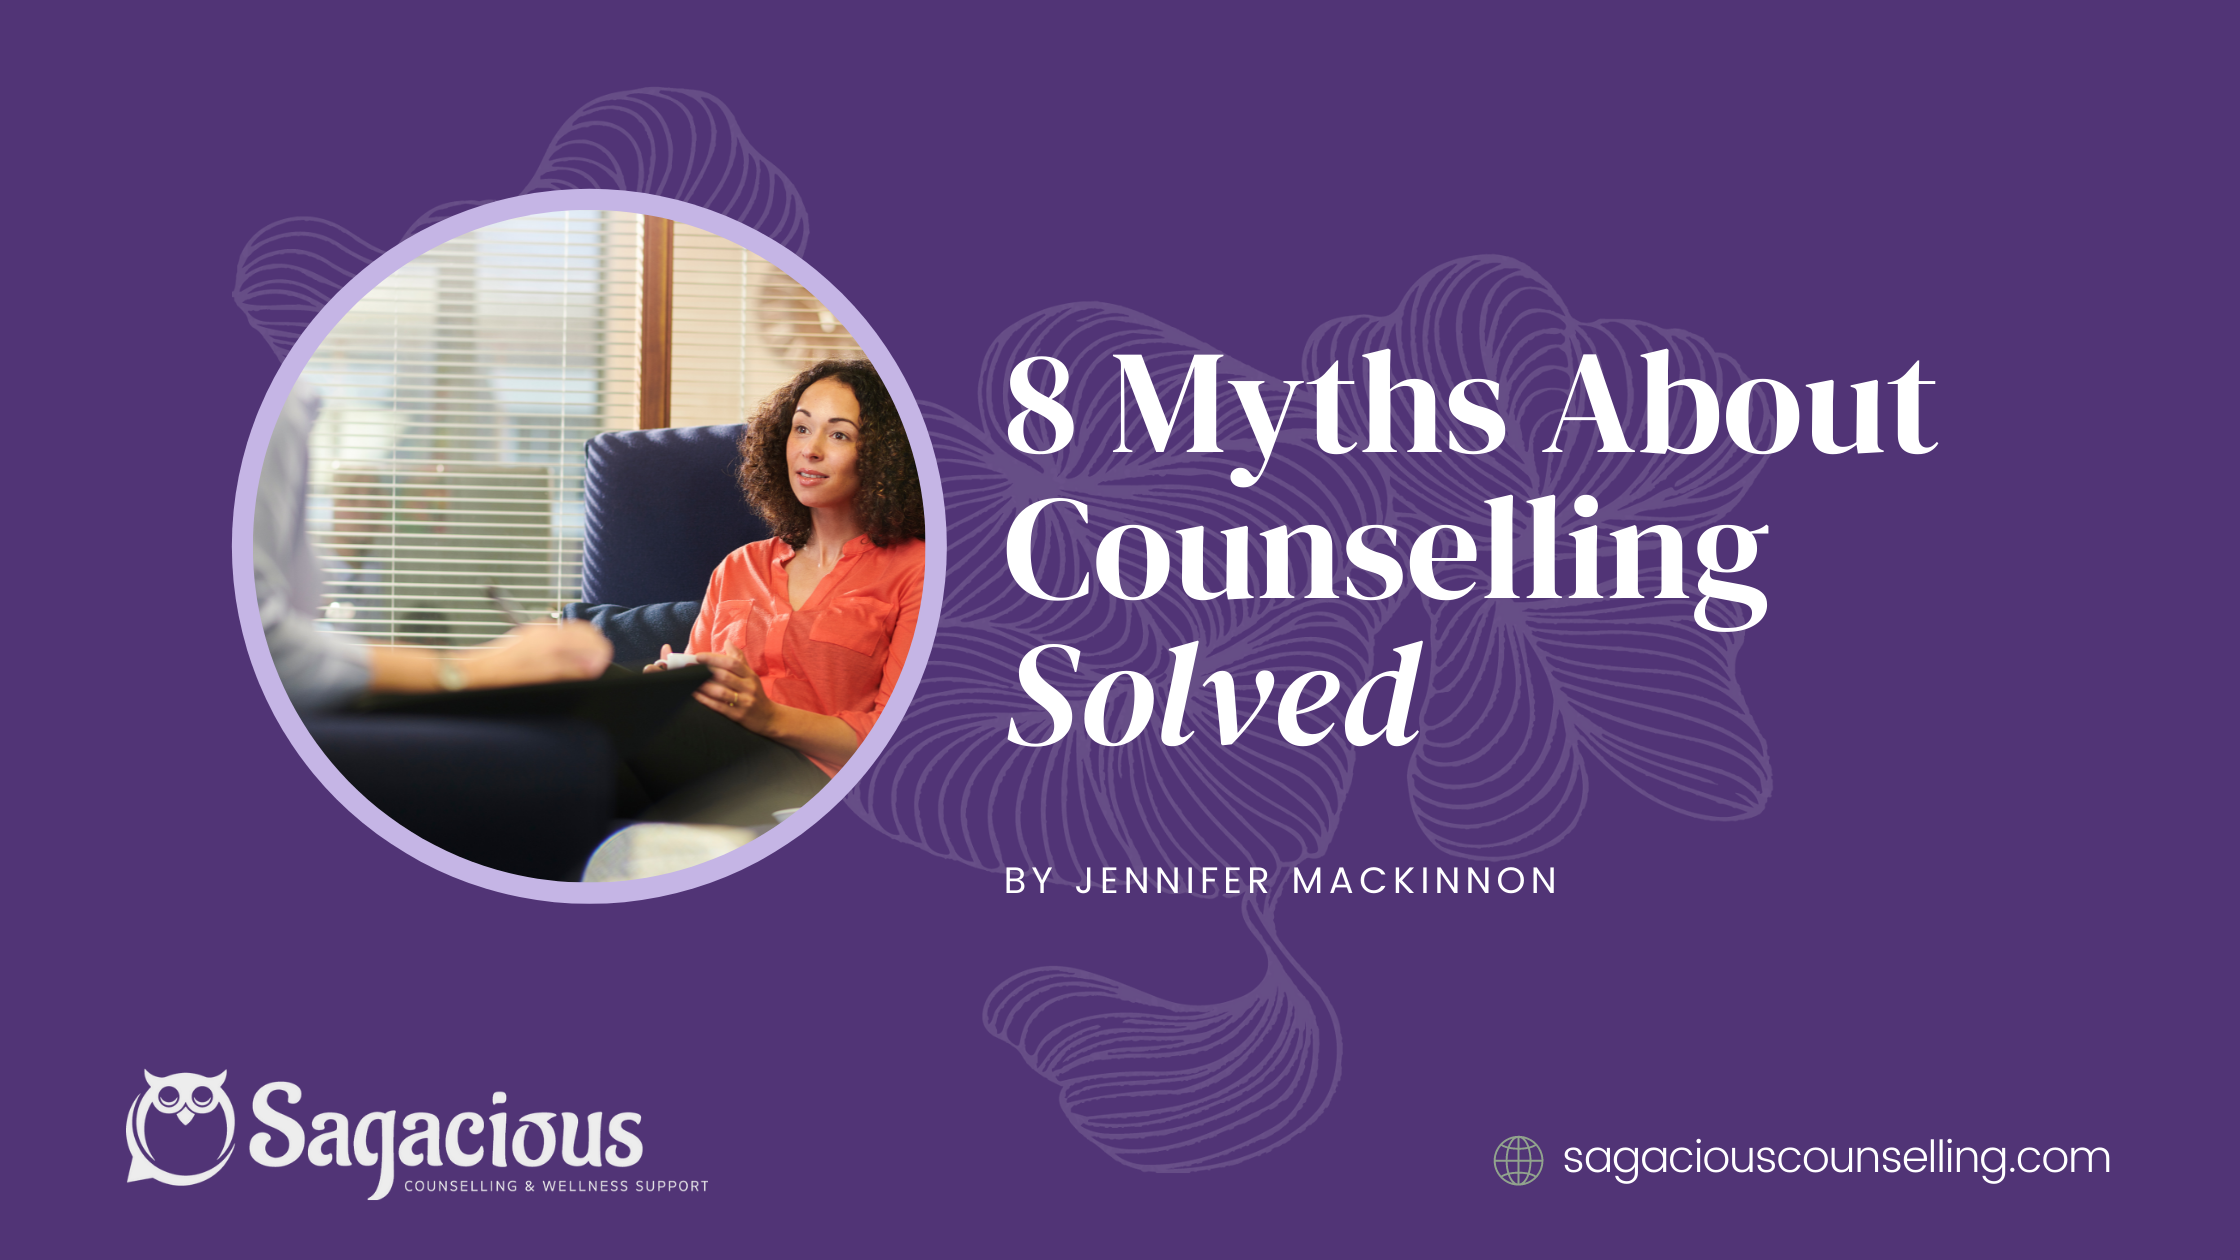 8 Myths About Counselling Solved